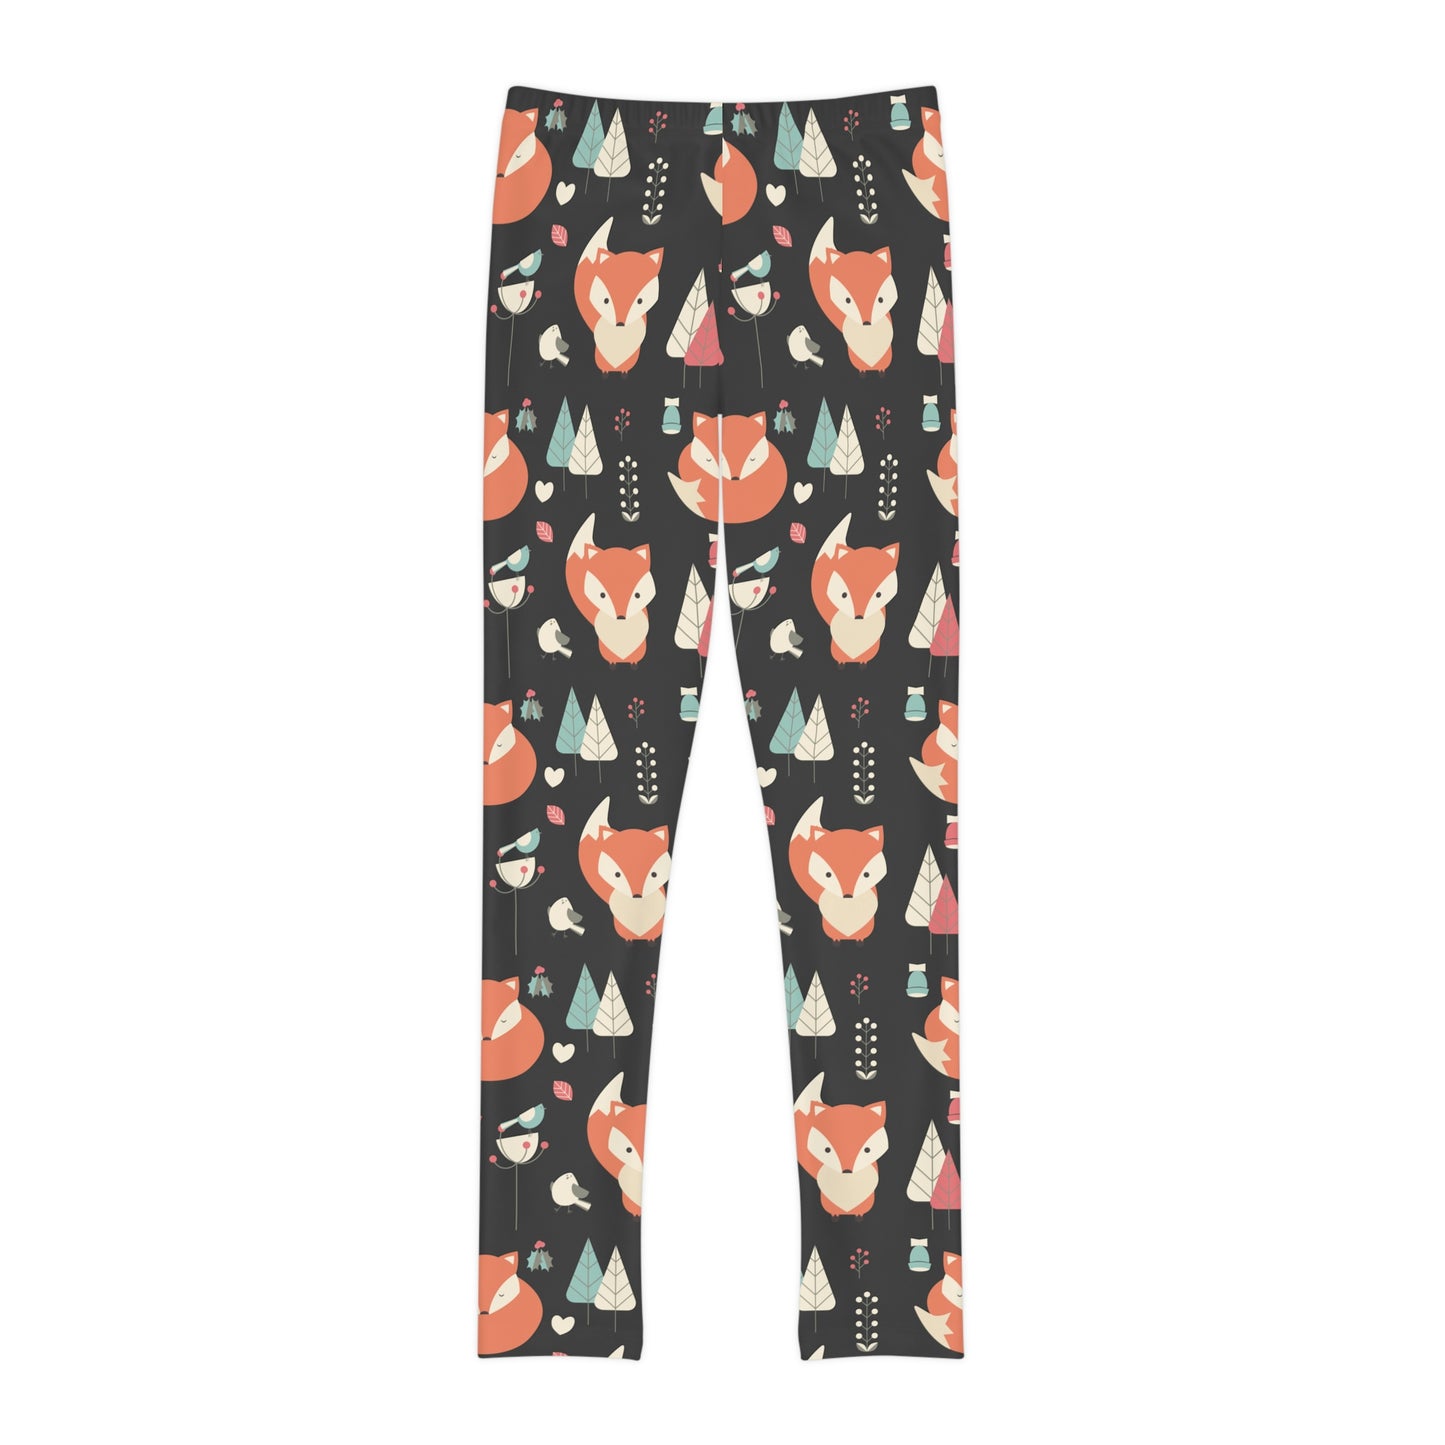 Fox animal kingdom, Safari Youth Leggings,  One of a Kind Gift - Unique Workout Activewear tights for kids, Daughter, Niece  Christmas Gift